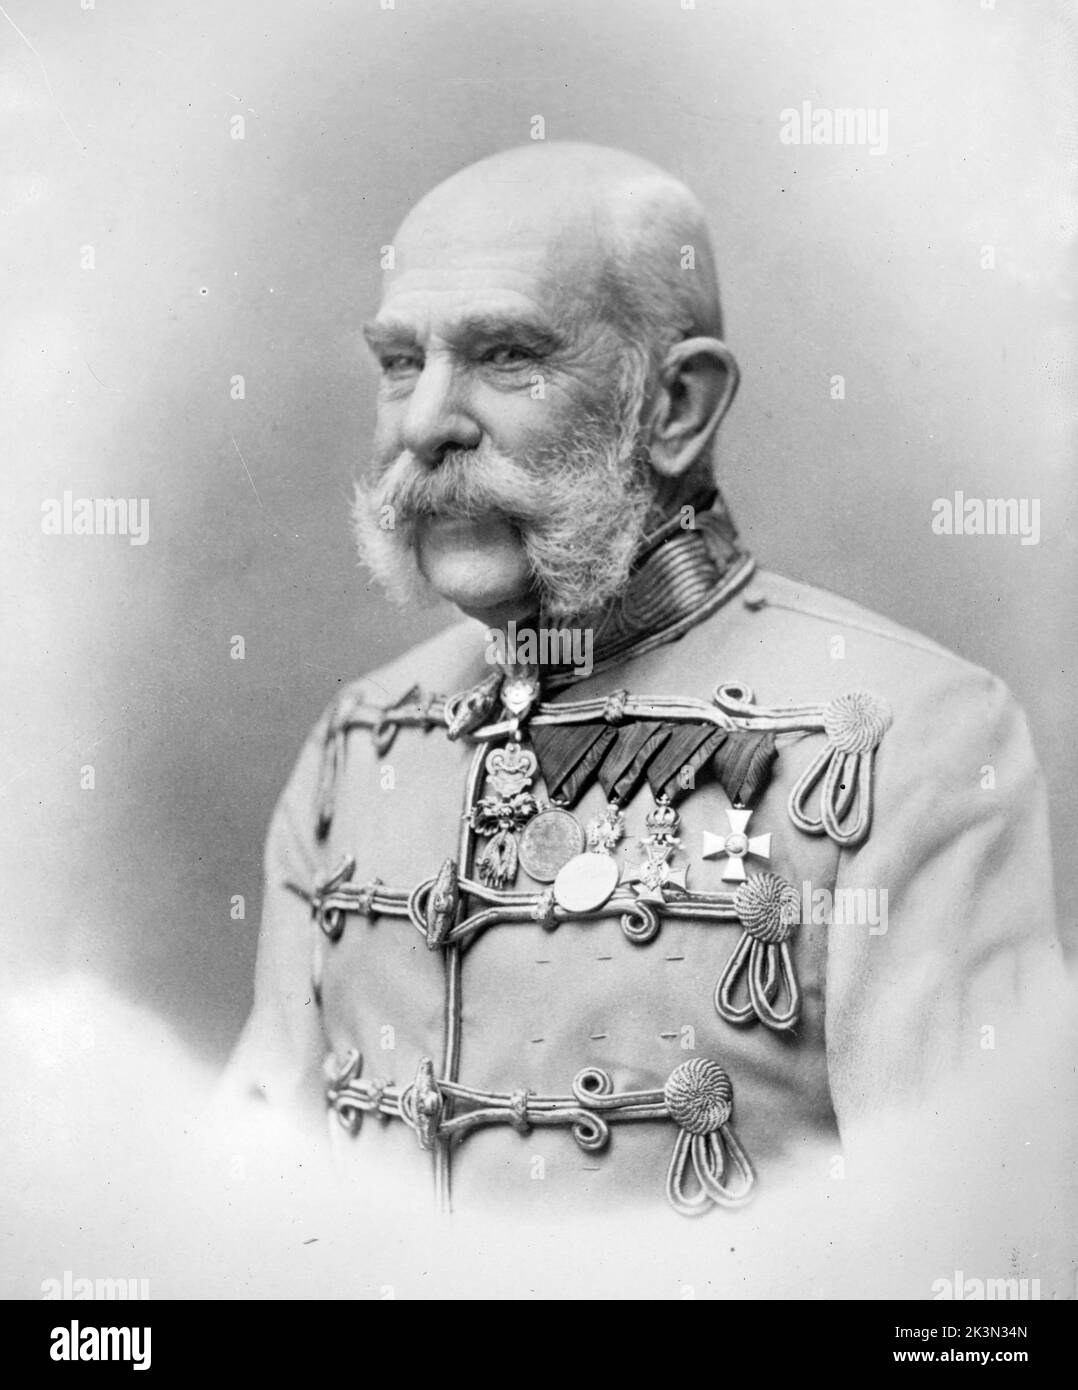 Franz Josef of Austria, in uniform Franz Joseph I or Francis Joseph I (German: Franz Joseph Karl, Hungarian: Ferenc József Károly, 18 August 1830 – 21 November 1916) was Emperor of Austria, King of Hungary, and the other states of the Austro-Hungarian Empire from 2 December 1848 until his death.[1] From 1 May 1850 to 24 August 1866 he was also President of the German Confederation. He was the longest-reigning ruler of the Austro-Hungarian Empire, as well as the longest-reigning emperor and seventh-longest-reigning monarch of any country in history.[2] Stock Photo